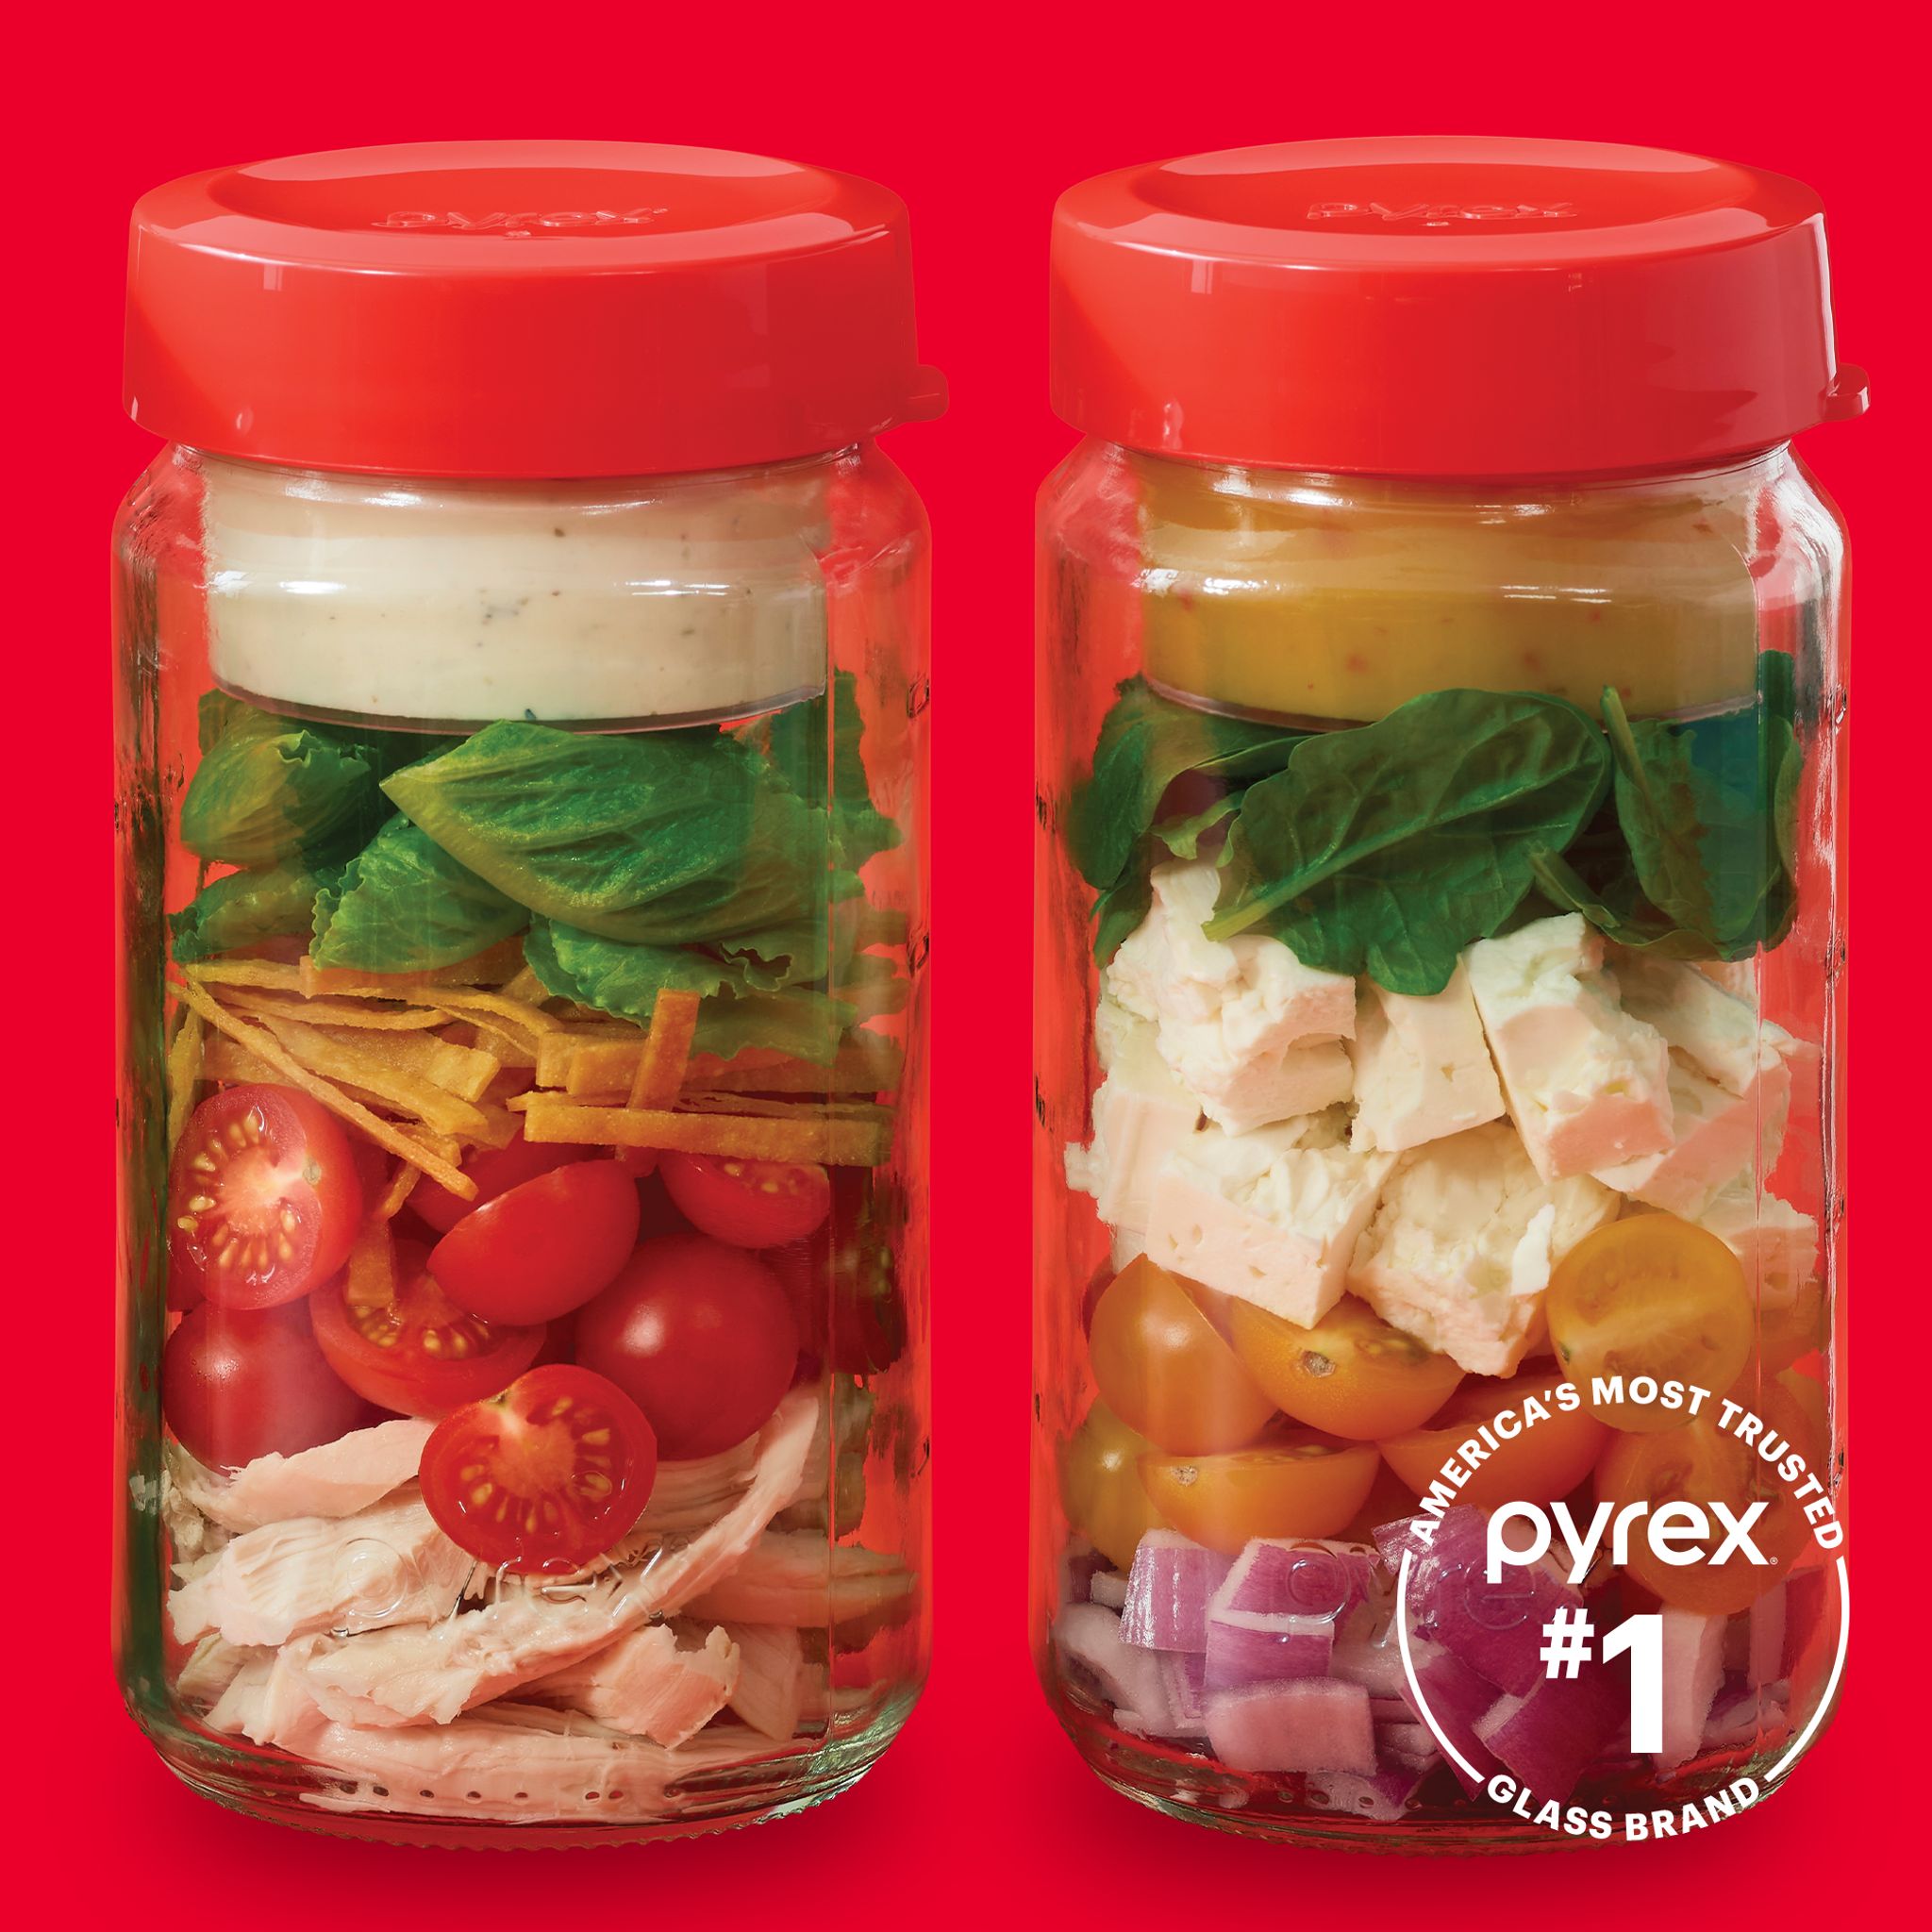 GlasLife® Refurbished Airtight Round Glass Containers (Set of 4)